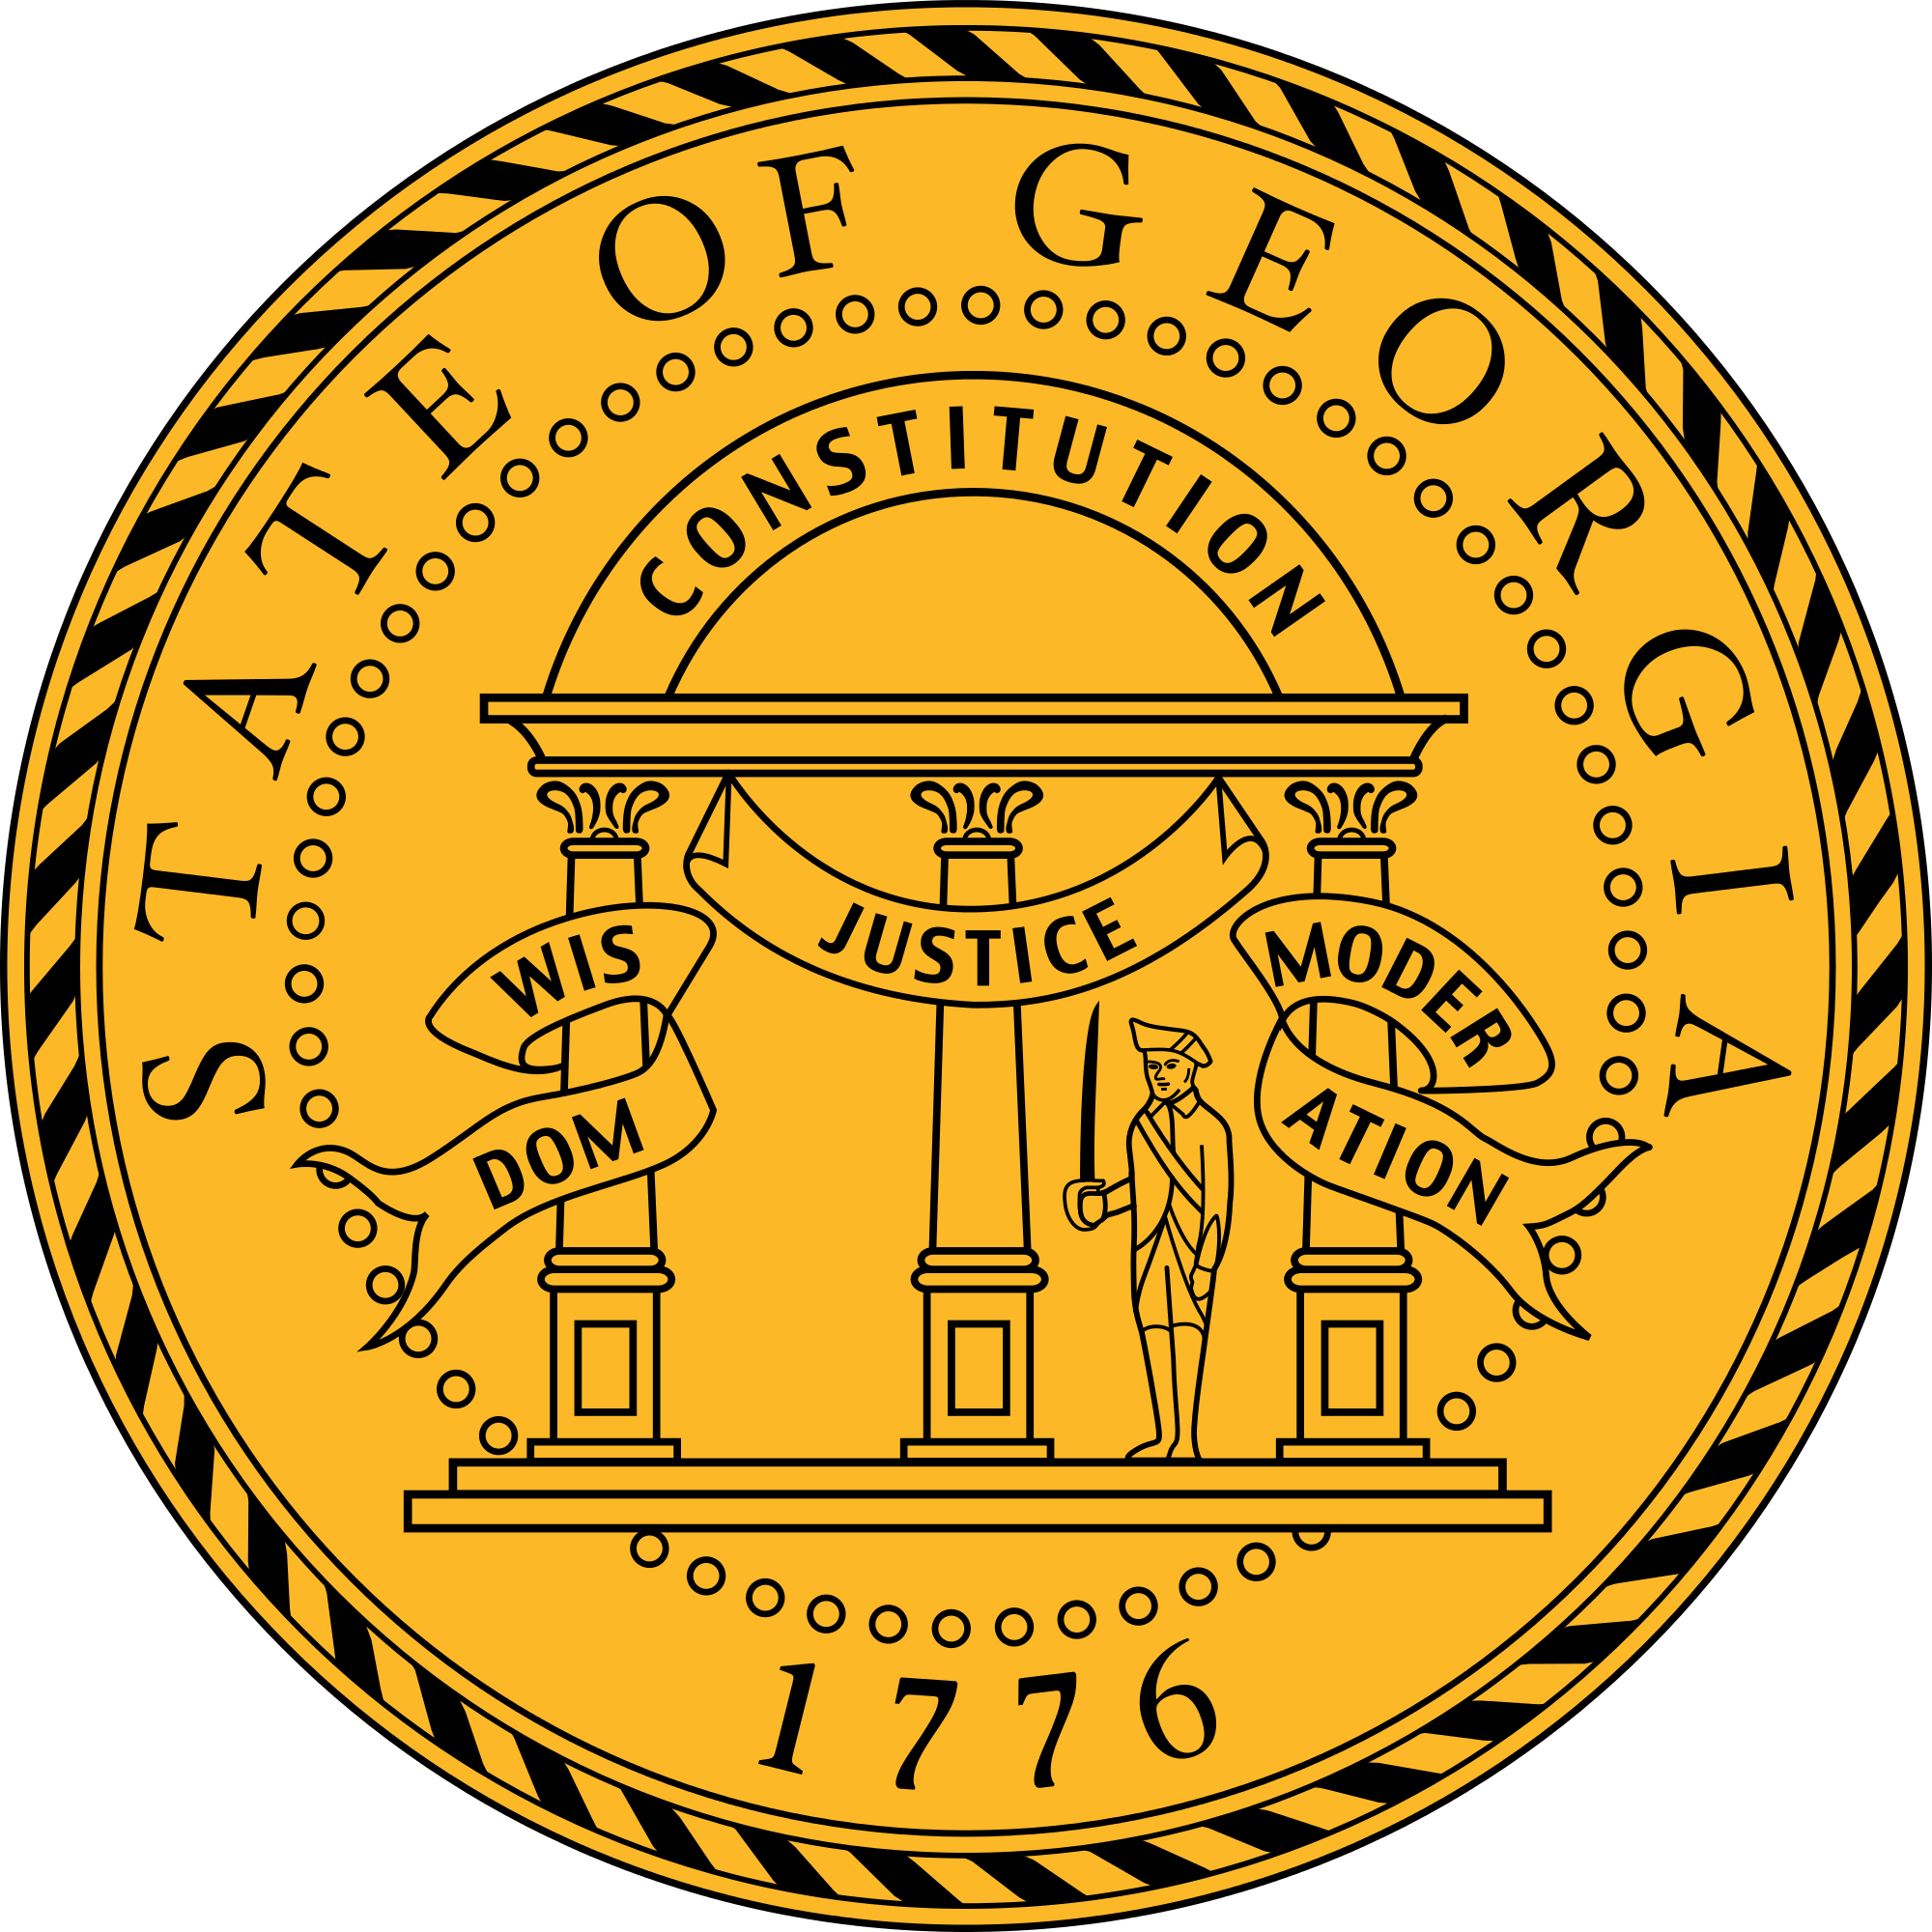 This week in legislative ineptitude: State of Georgia wildly misconstrues purpose and meaning of the word "copyright", sues man for helping people understand the law of the land